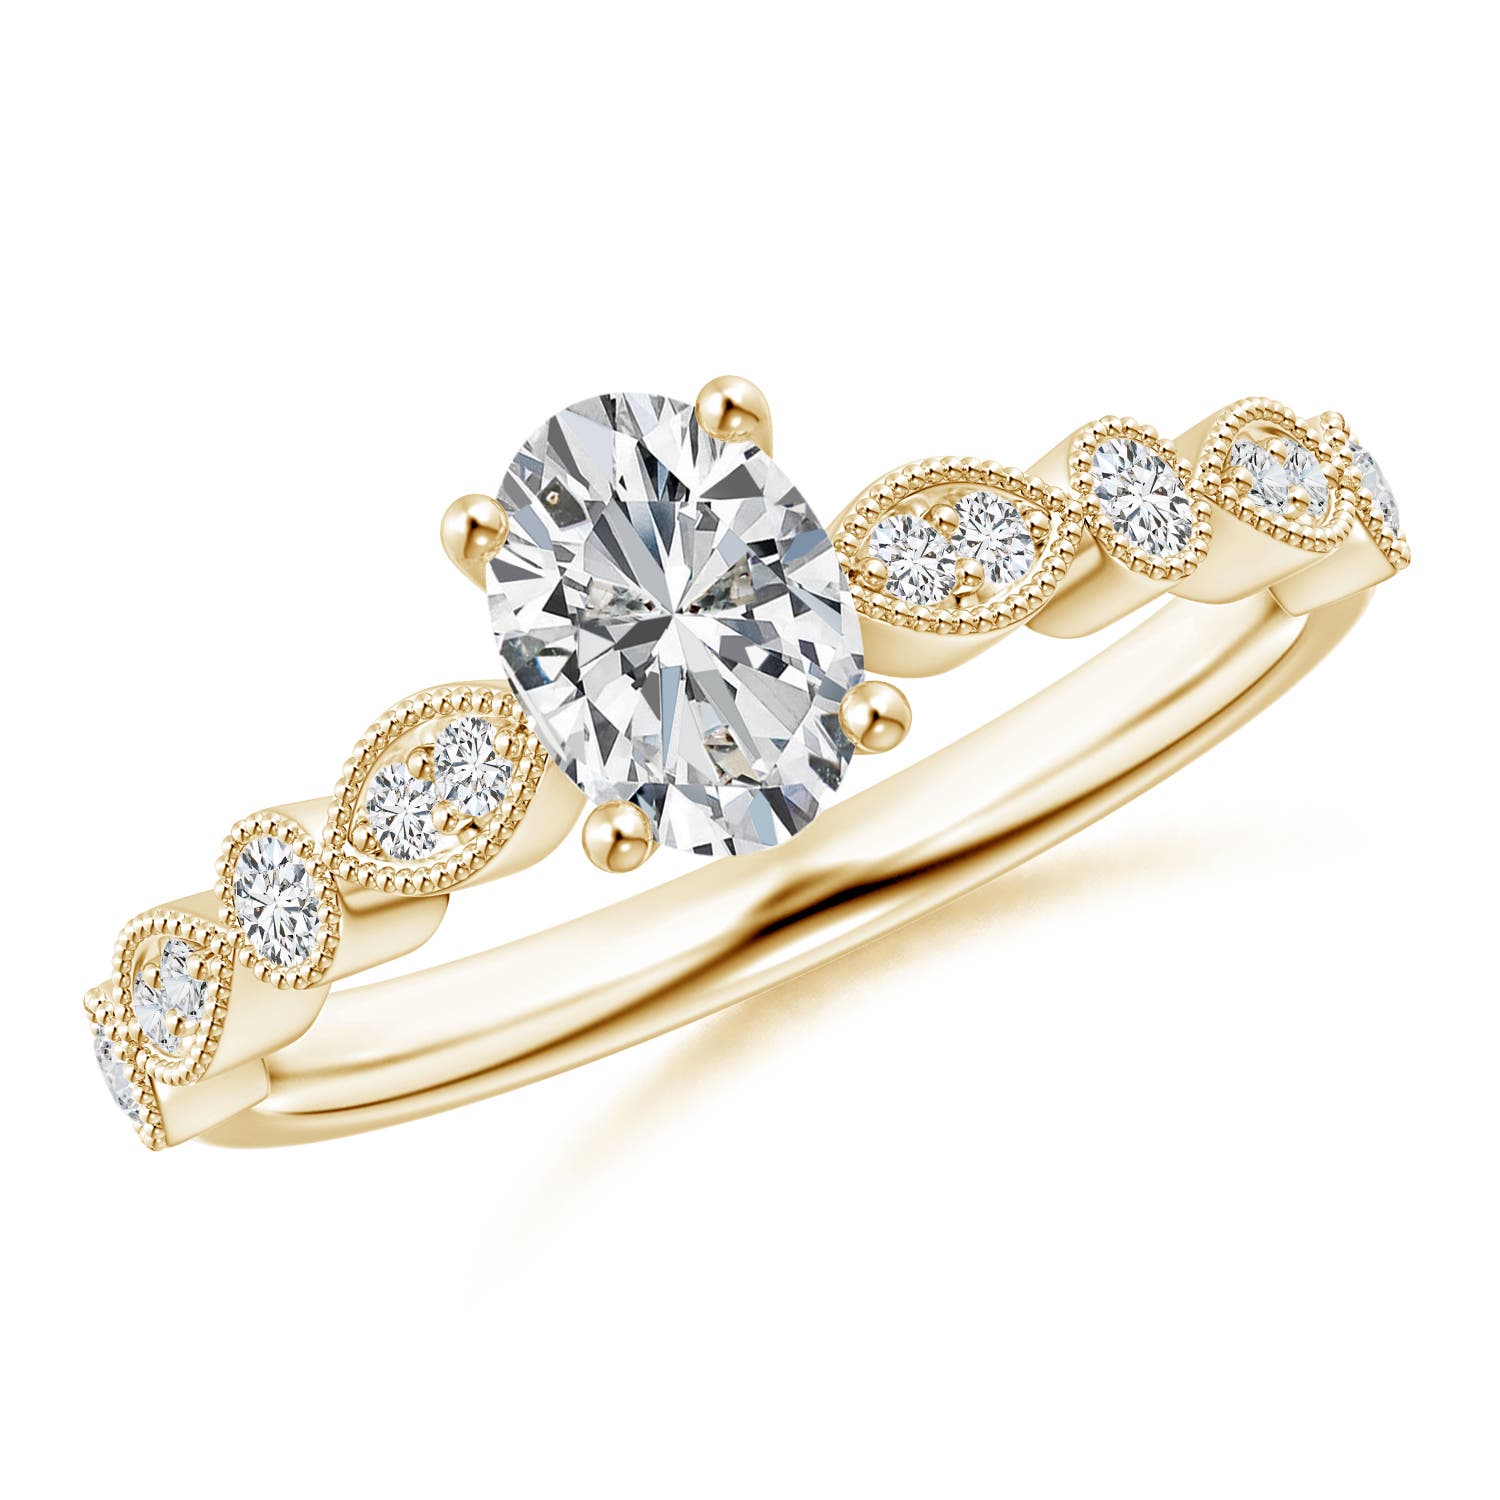 H, SI2 / 0.98 CT / 14 KT Yellow Gold